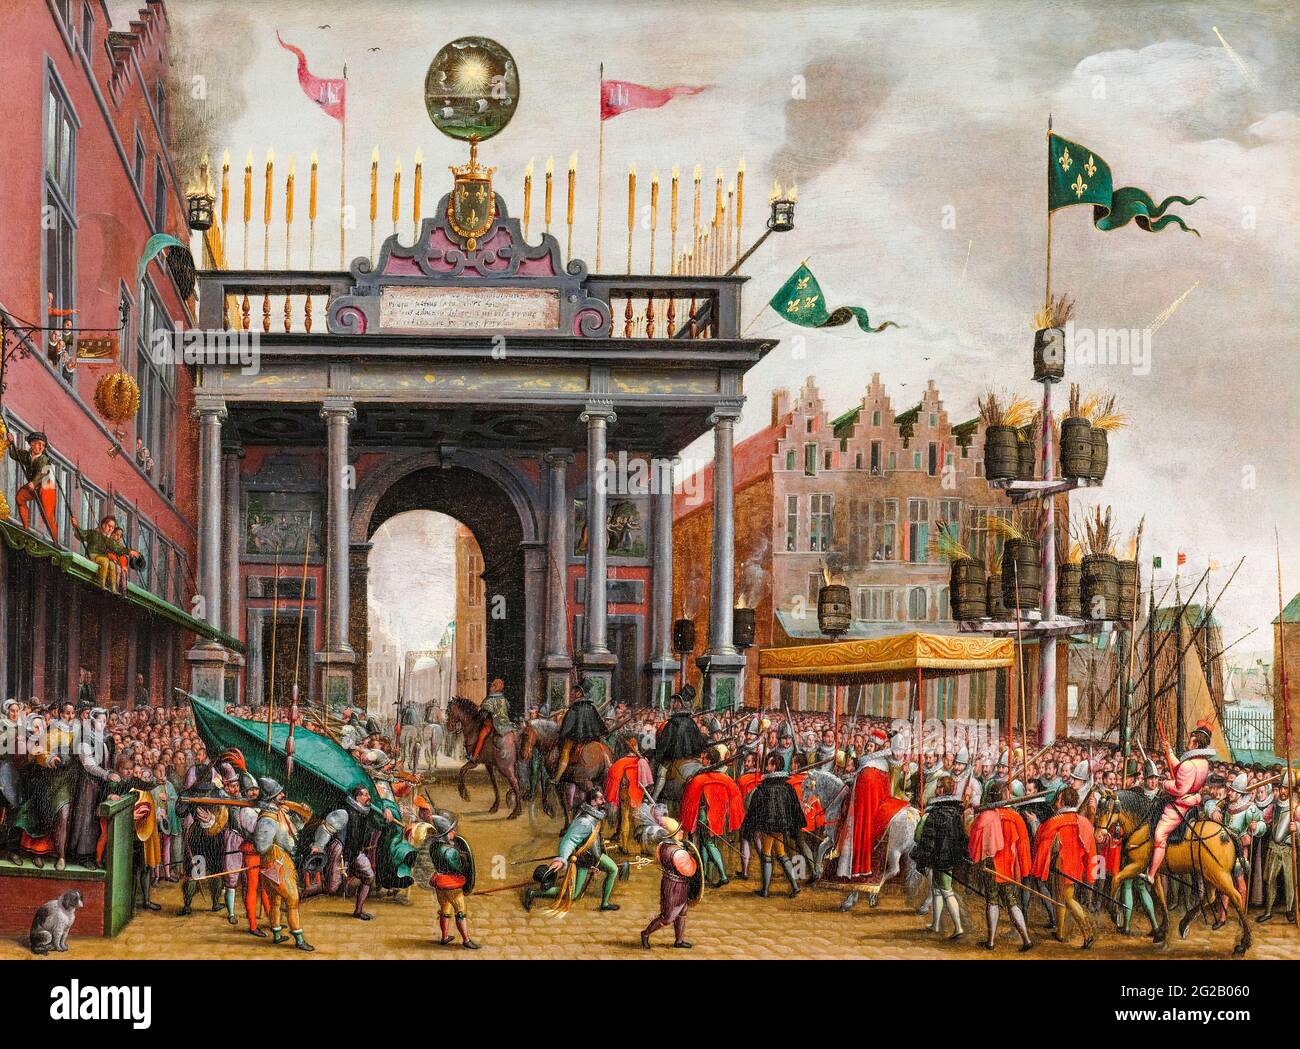 Entry of Françis, Duke of Anjou (1555-1584) into Antwerp under the Triumphal Arch at St. Jan's Bridge on 19 February 1582, painting by Monogrammist MHVH, 1582-1600 Stock Photo